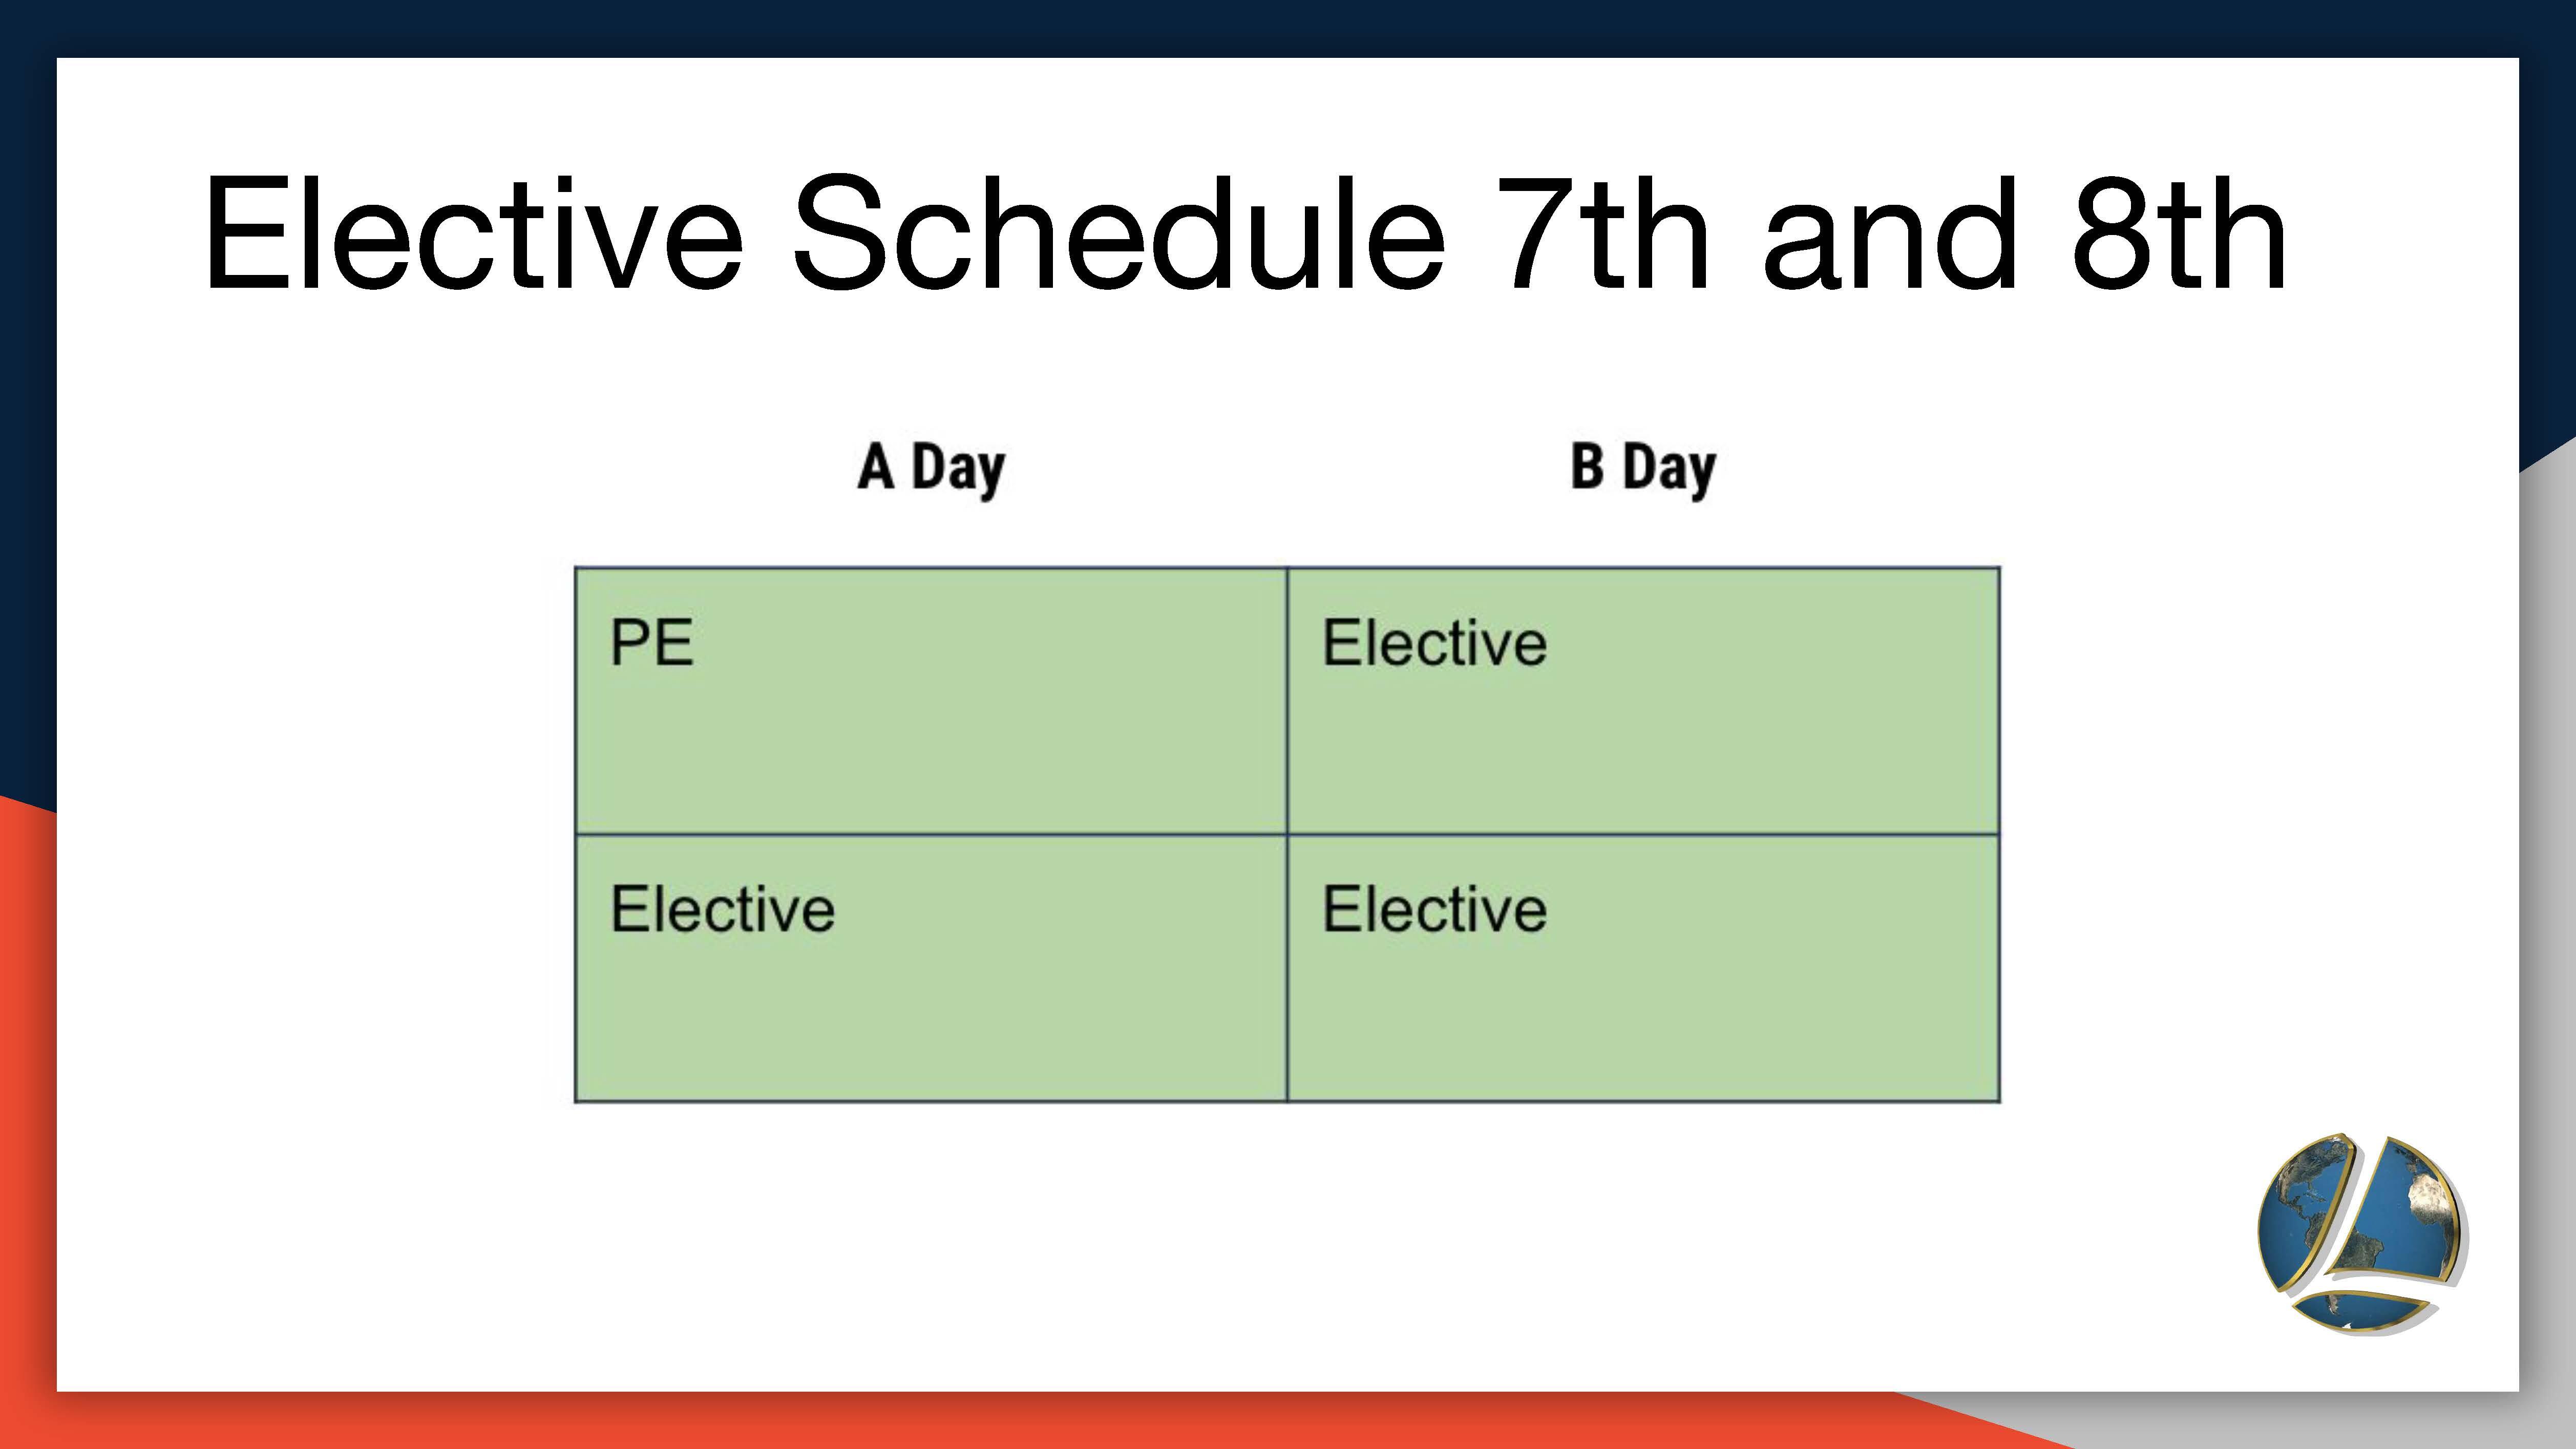 Elective Schedule for 7th & 8th Grade